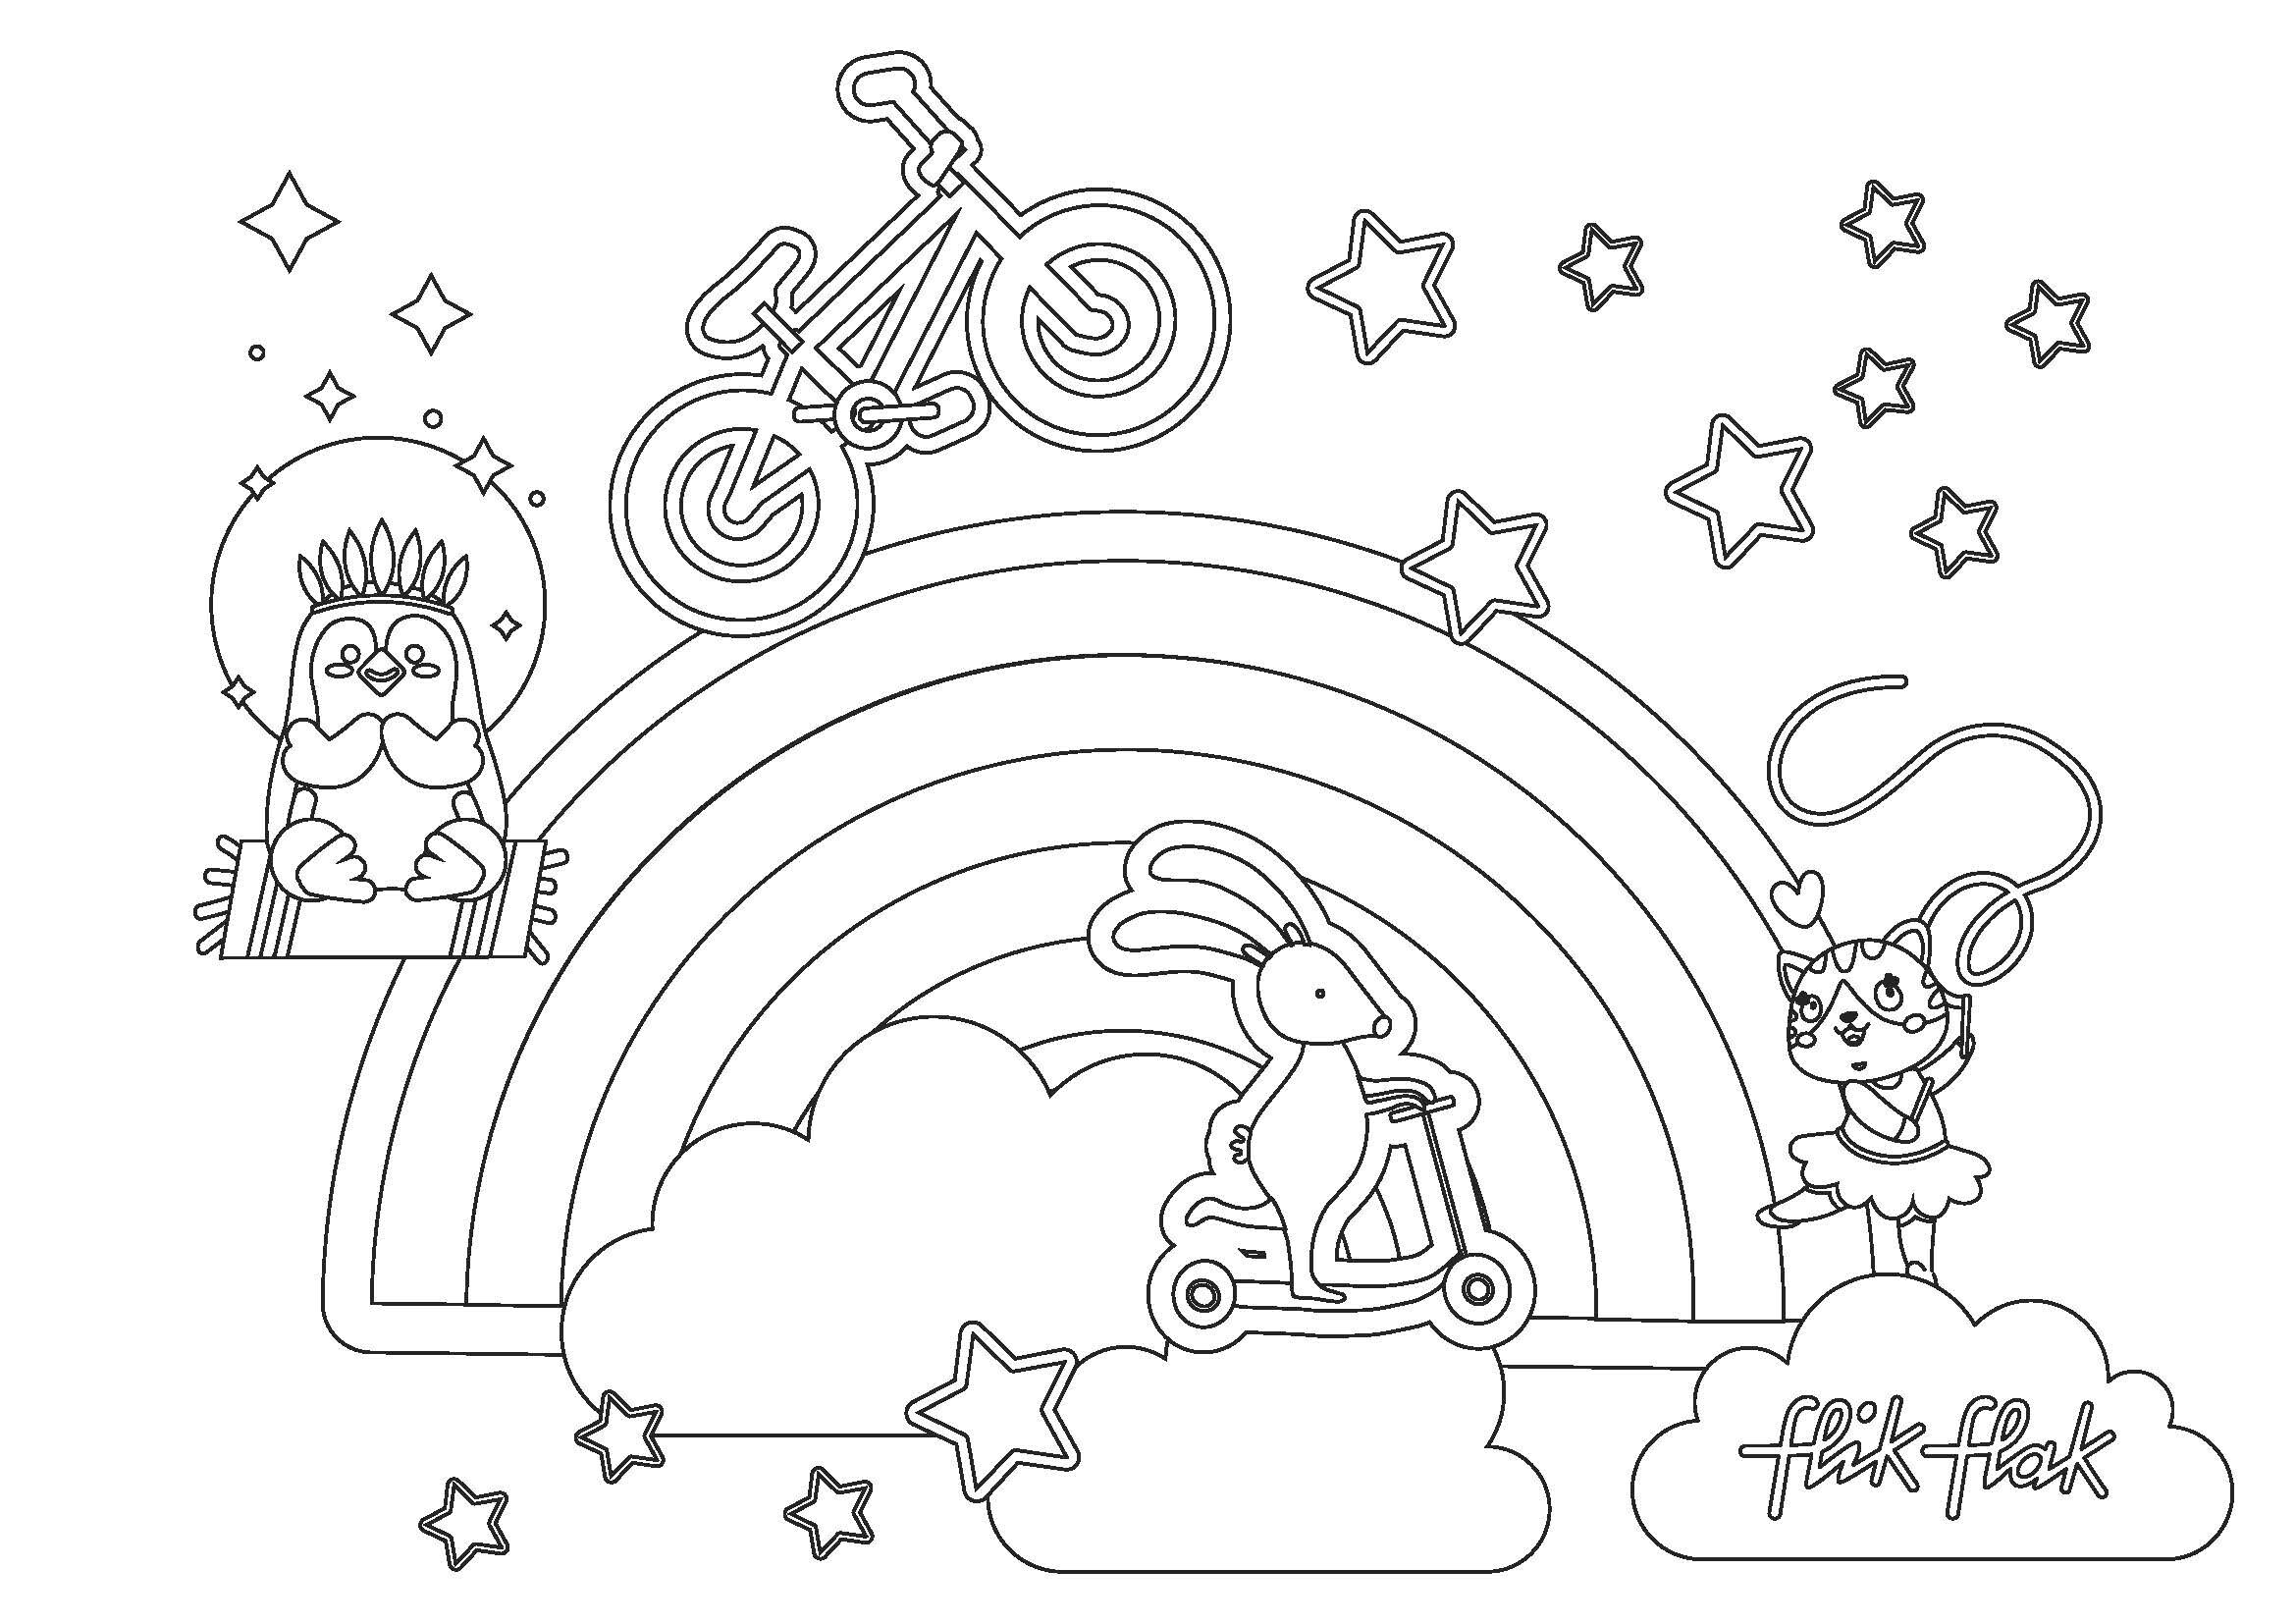 Sport Lovers Coloring Sheet